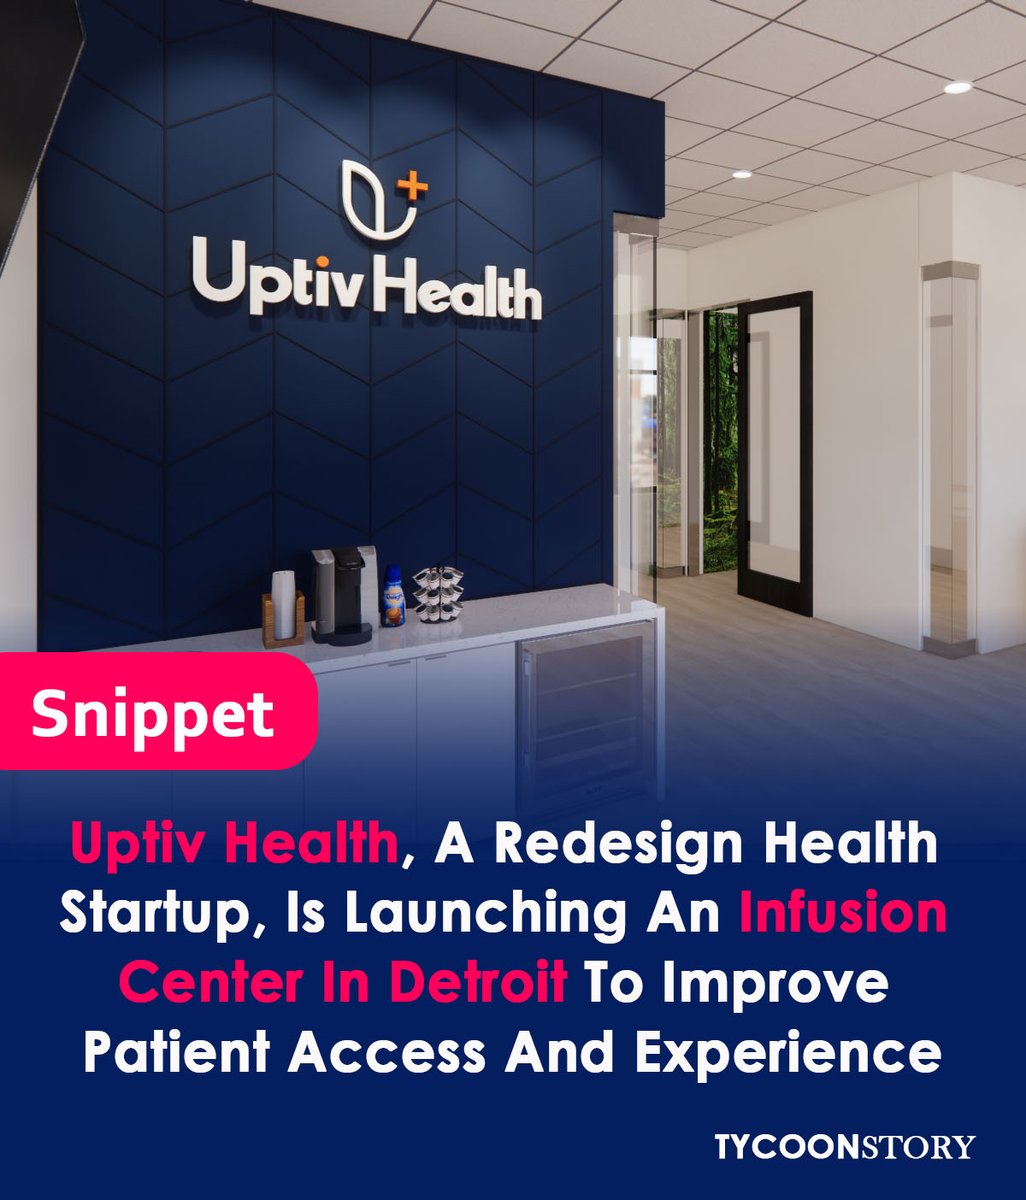 Uptiv Health, a new startup from Redesign Health, is opening an infusion center in Detroit to improve patient access and the quality of infusion care
#patientexperience #healthcareinnovation #infusiontherapy #healthtech #digitalhealth  #UptivApp #RedesignHealth  #digitalpayment